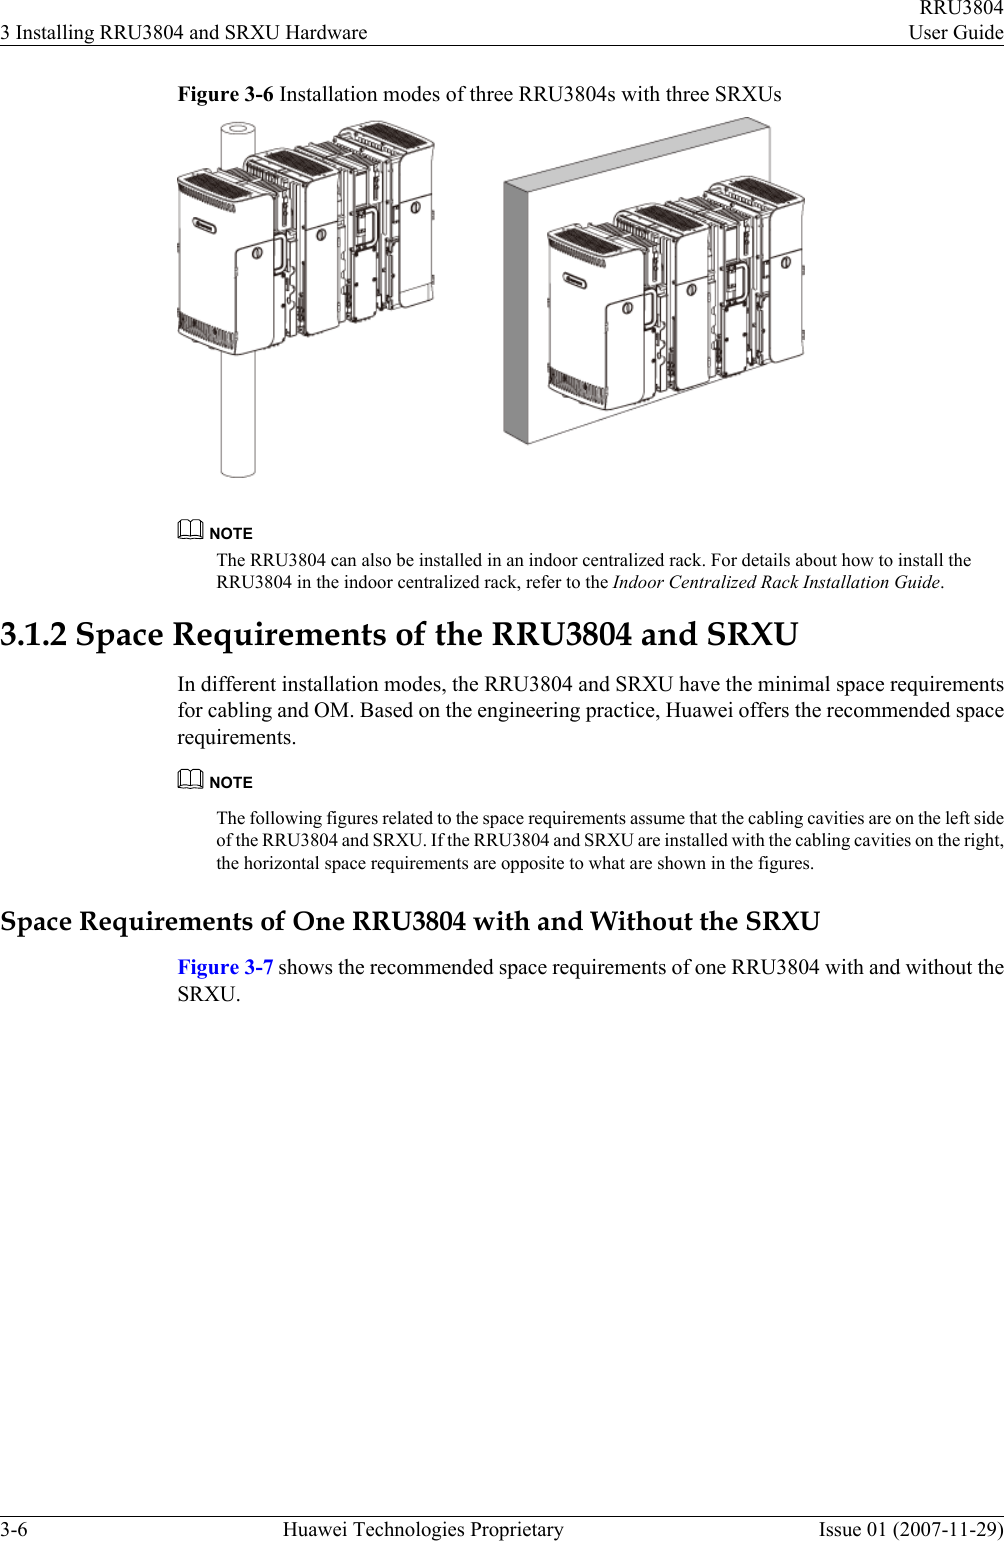 Figure 3-6 Installation modes of three RRU3804s with three SRXUsNOTEThe RRU3804 can also be installed in an indoor centralized rack. For details about how to install theRRU3804 in the indoor centralized rack, refer to the Indoor Centralized Rack Installation Guide.3.1.2 Space Requirements of the RRU3804 and SRXUIn different installation modes, the RRU3804 and SRXU have the minimal space requirementsfor cabling and OM. Based on the engineering practice, Huawei offers the recommended spacerequirements.NOTEThe following figures related to the space requirements assume that the cabling cavities are on the left sideof the RRU3804 and SRXU. If the RRU3804 and SRXU are installed with the cabling cavities on the right,the horizontal space requirements are opposite to what are shown in the figures.Space Requirements of One RRU3804 with and Without the SRXUFigure 3-7 shows the recommended space requirements of one RRU3804 with and without theSRXU.3 Installing RRU3804 and SRXU HardwareRRU3804User Guide3-6 Huawei Technologies Proprietary Issue 01 (2007-11-29)